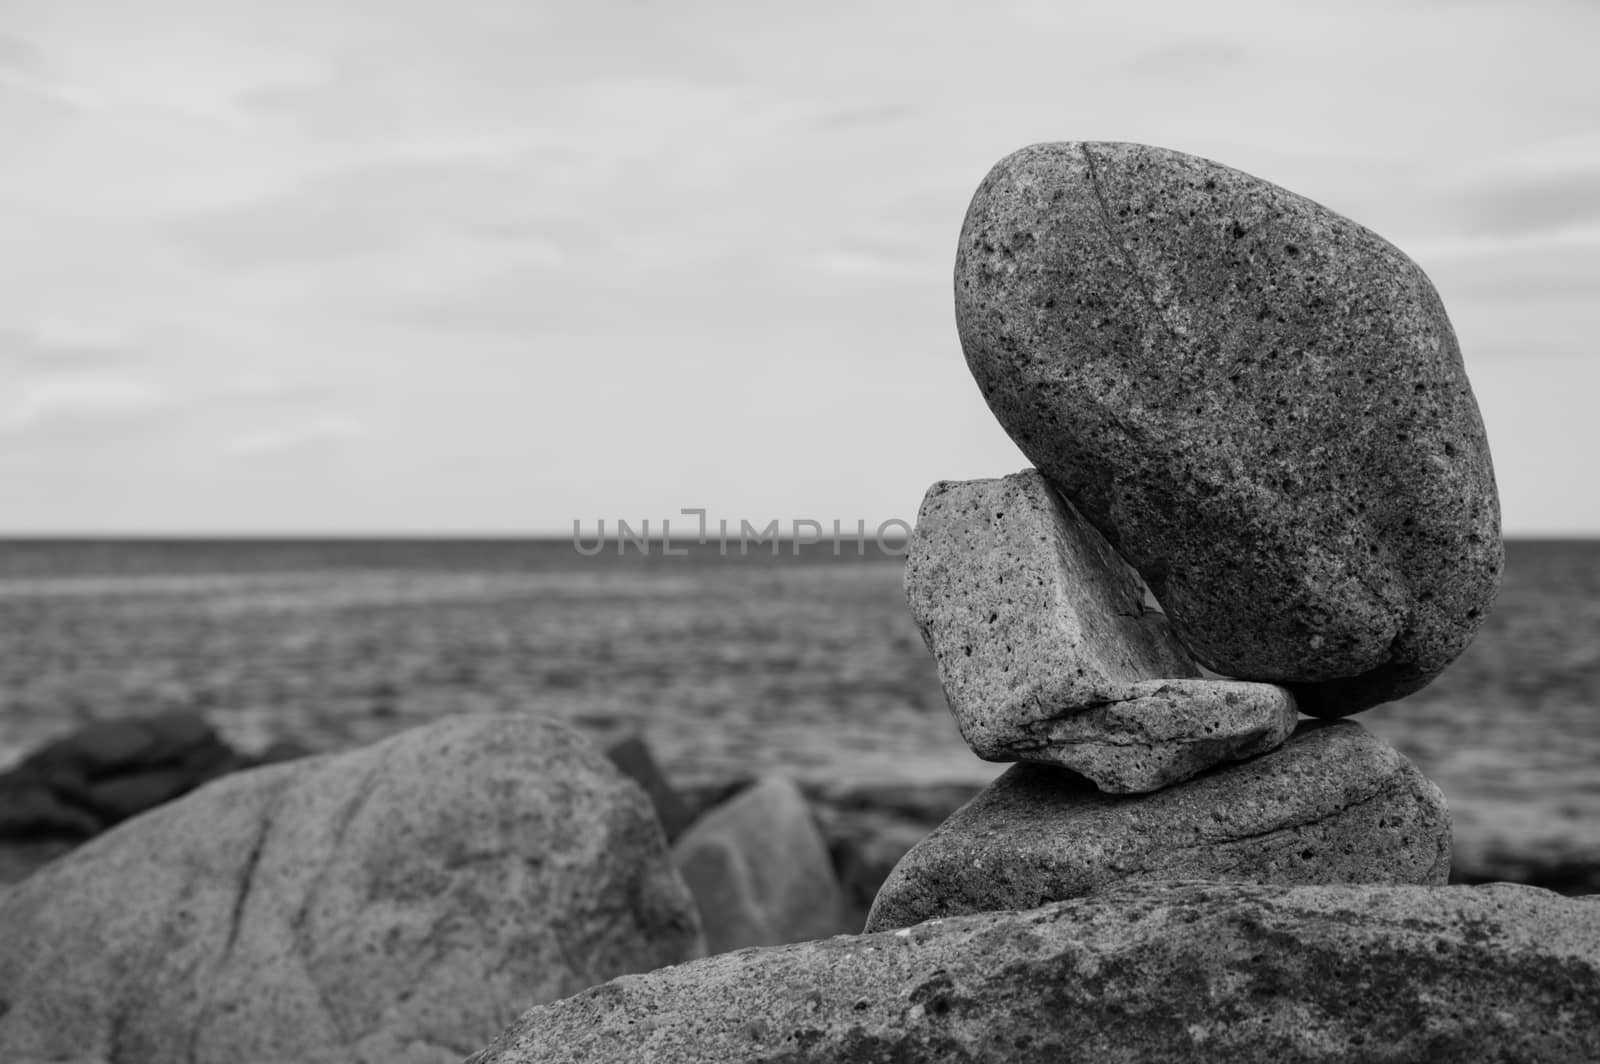 Stone balance by the sea bn by Faurinz